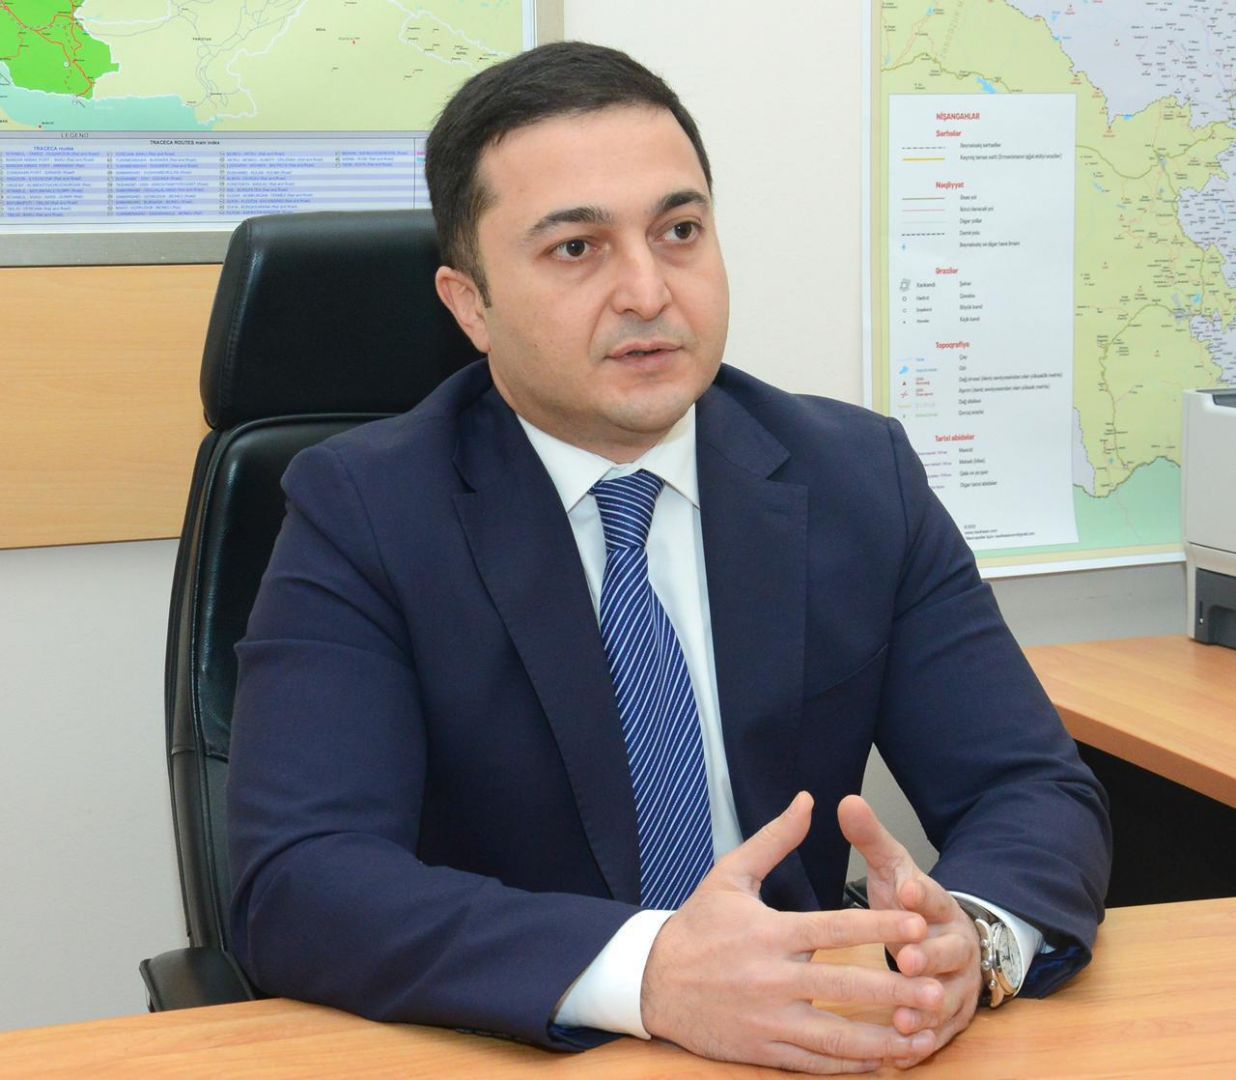 TRACECA's official upbeat about Azerbaijan's role as transportation hub [INTERVIEW]